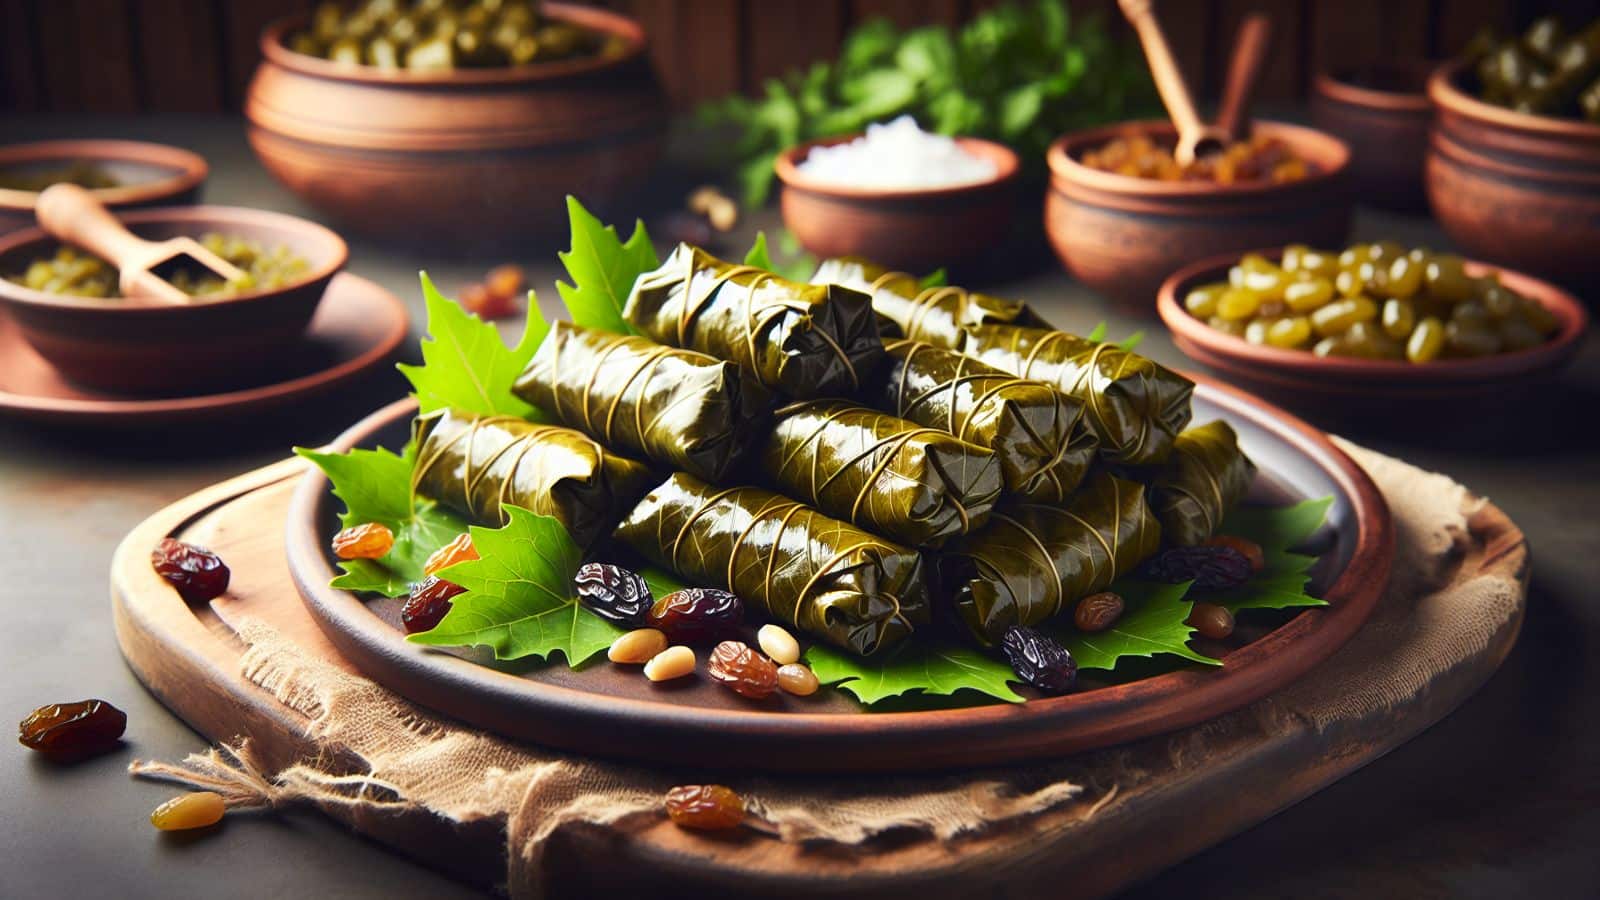 Turkey on your plate: Make tempting stuffed dolmas today